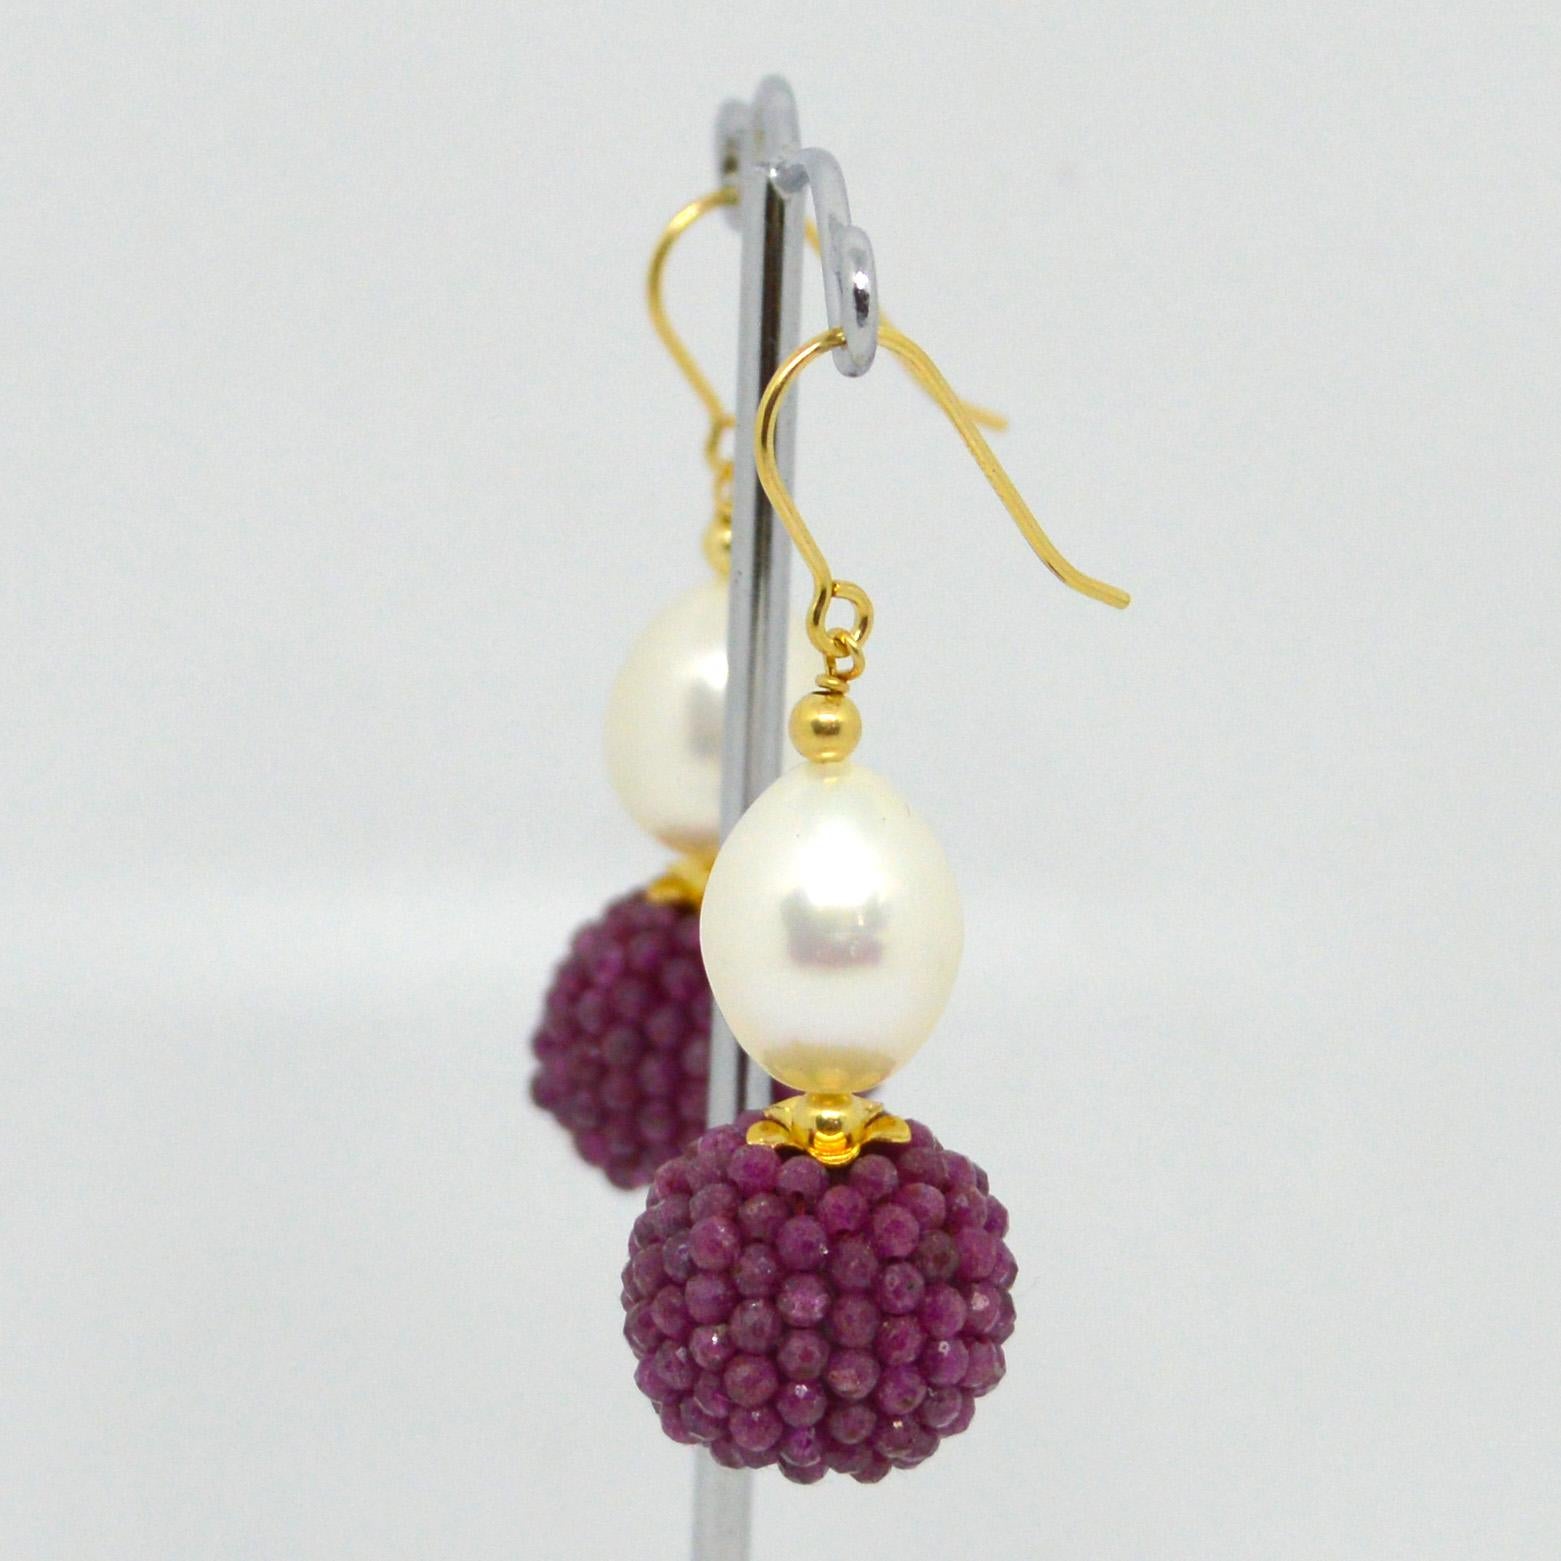 Natural Freshwater Pearl 15x10mm with a hand made beaded bead of natural Ruby mirco faceted beads 14k Gold Filled headpin and 3mm beads and Sheppard.

Total Earring length 45mm.
